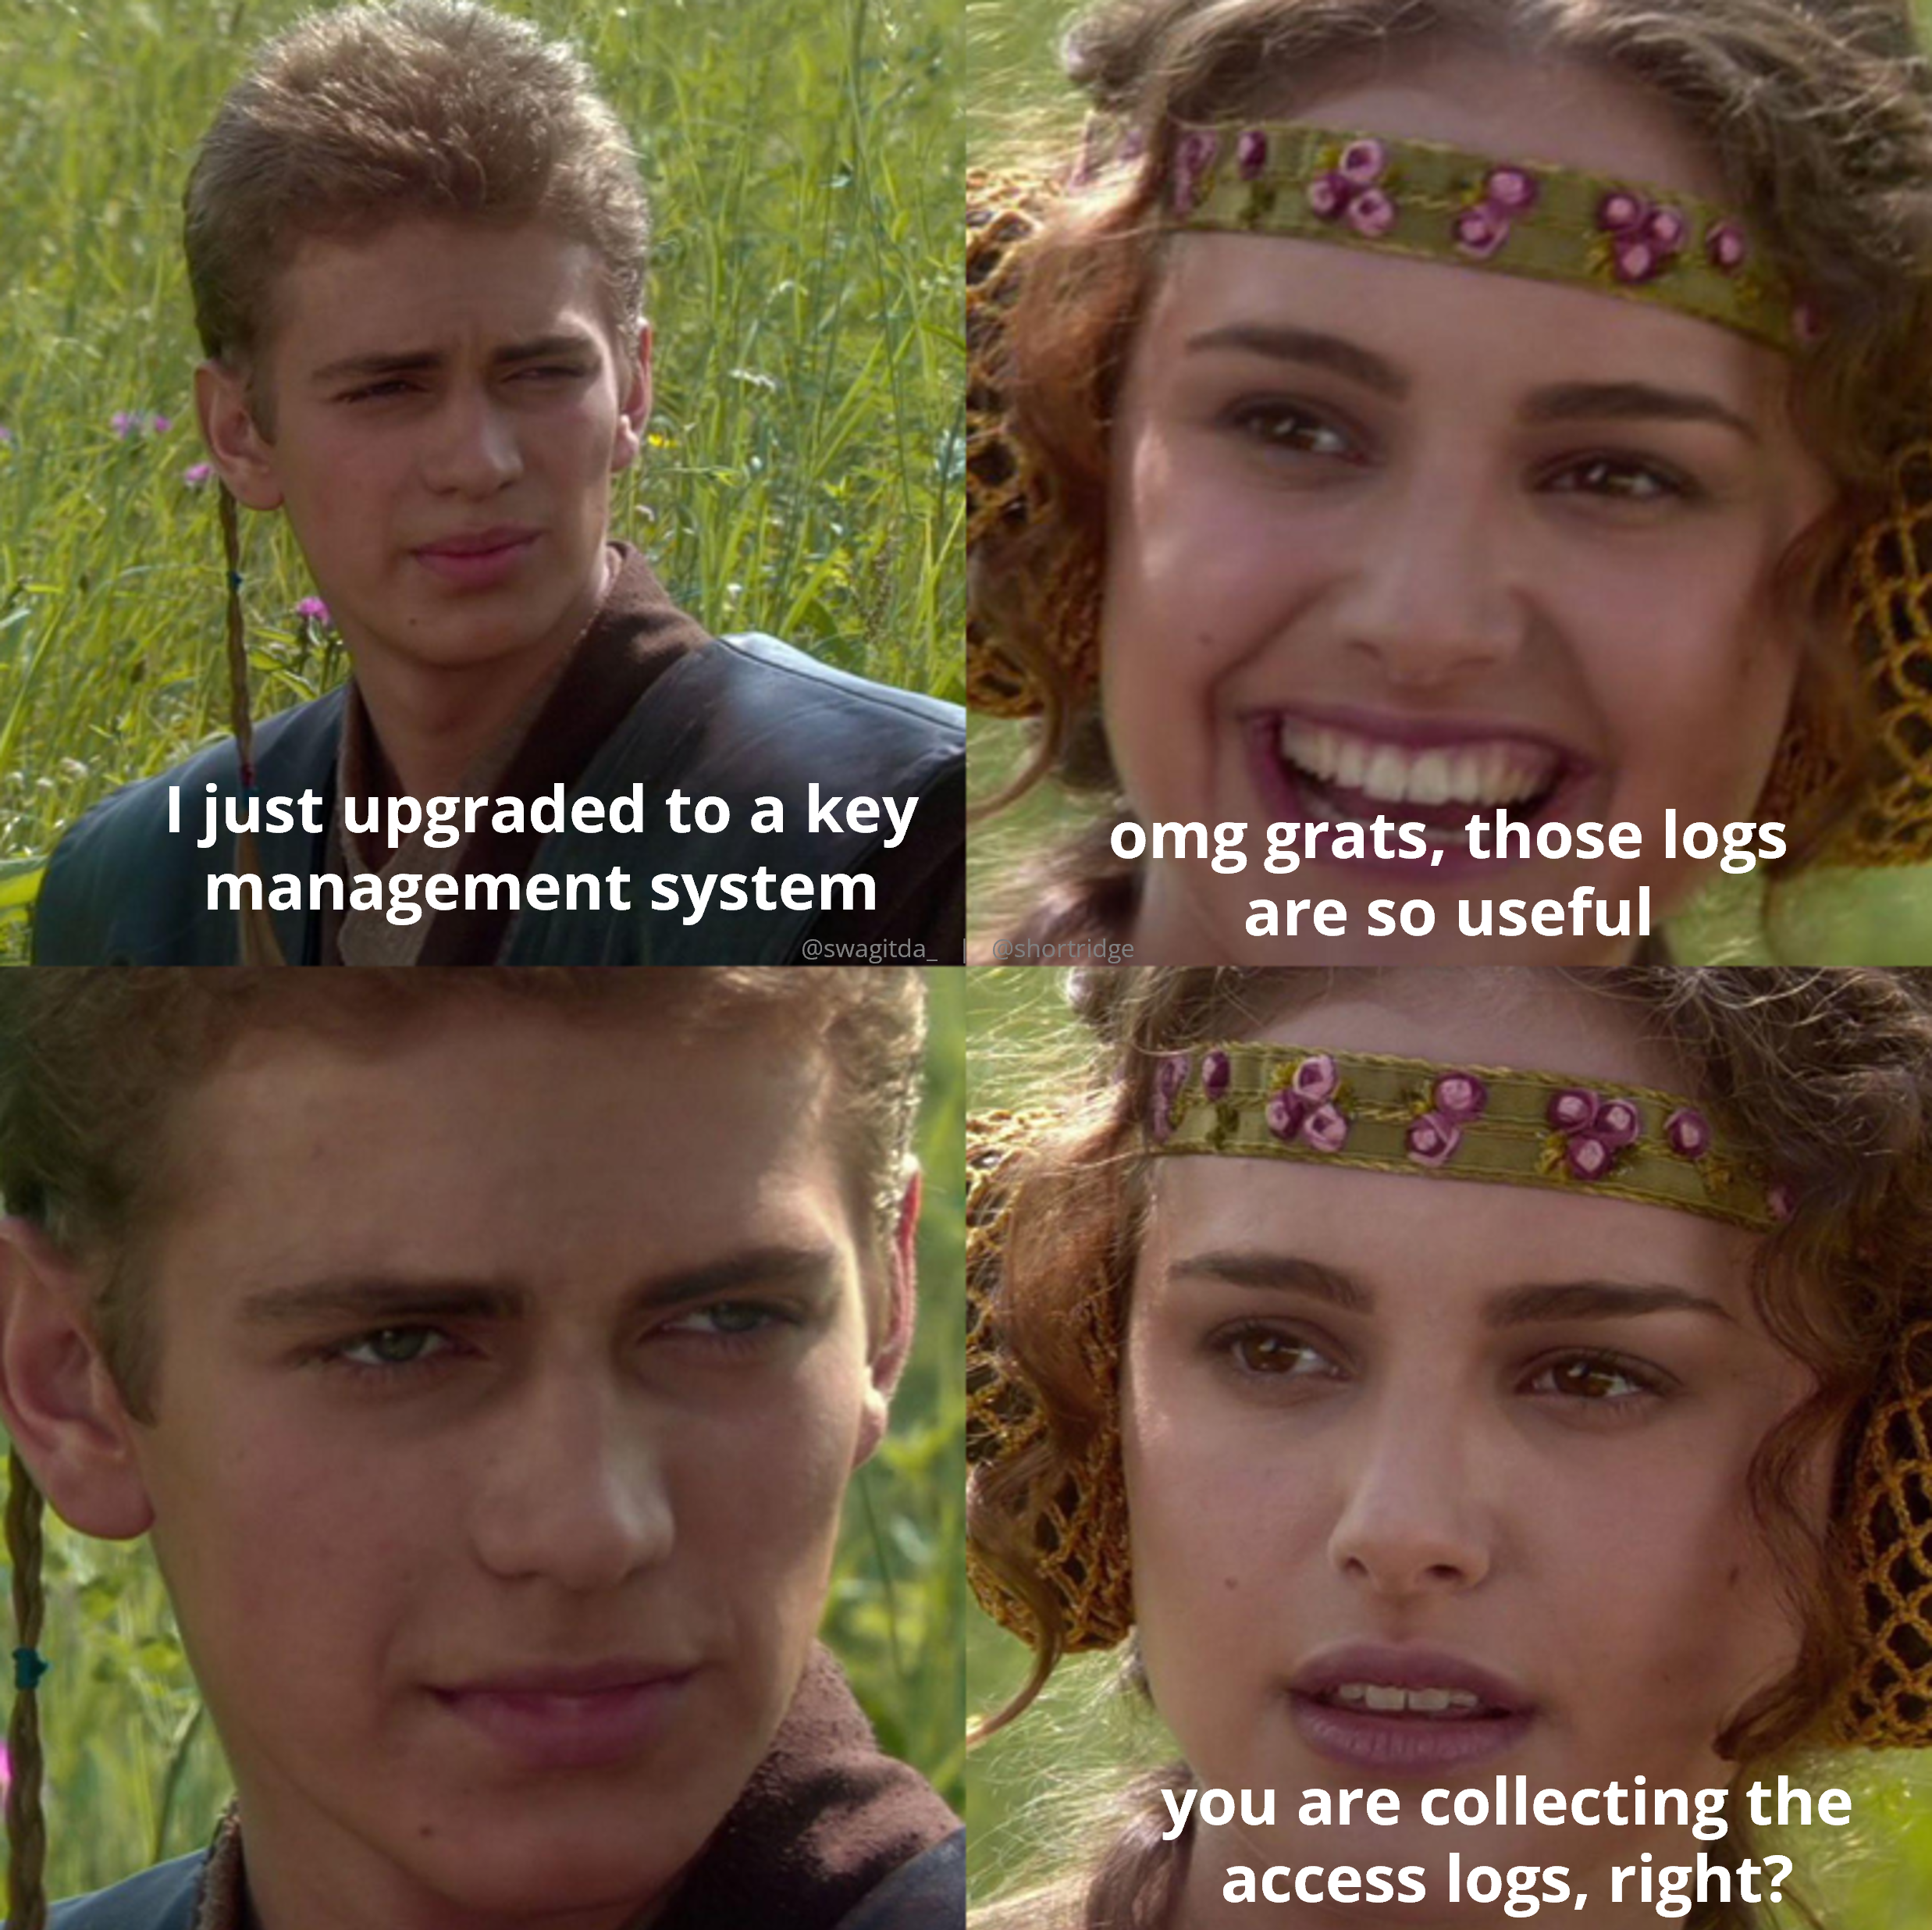 A variation of the Anakin Padme 4 Panel Meme. In the first panel, Anakin tells Padme that he just upgraded to a key management system. In the second panel, Padme, with a gleeful expression on her face, responds: omg grats those logs are so useful. In the third panel, Anakin stares back at her with a blank expression. In the fourth panel, Padme looks shocked and concerned; she says: you are collecting the access logs, right?